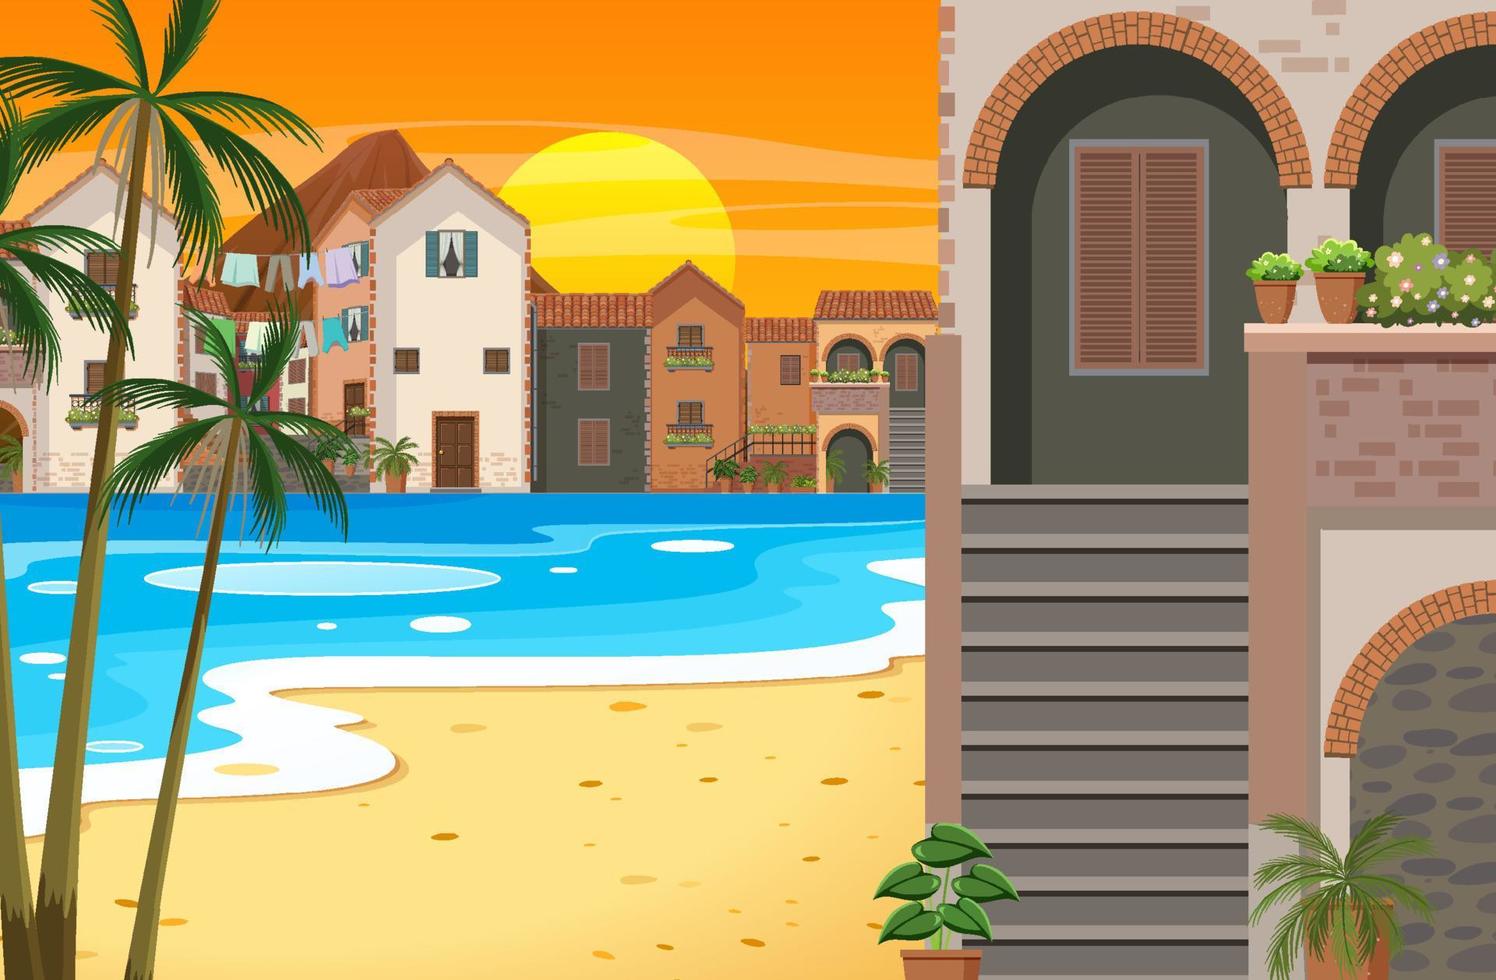 Scene with buildings by the beach vector